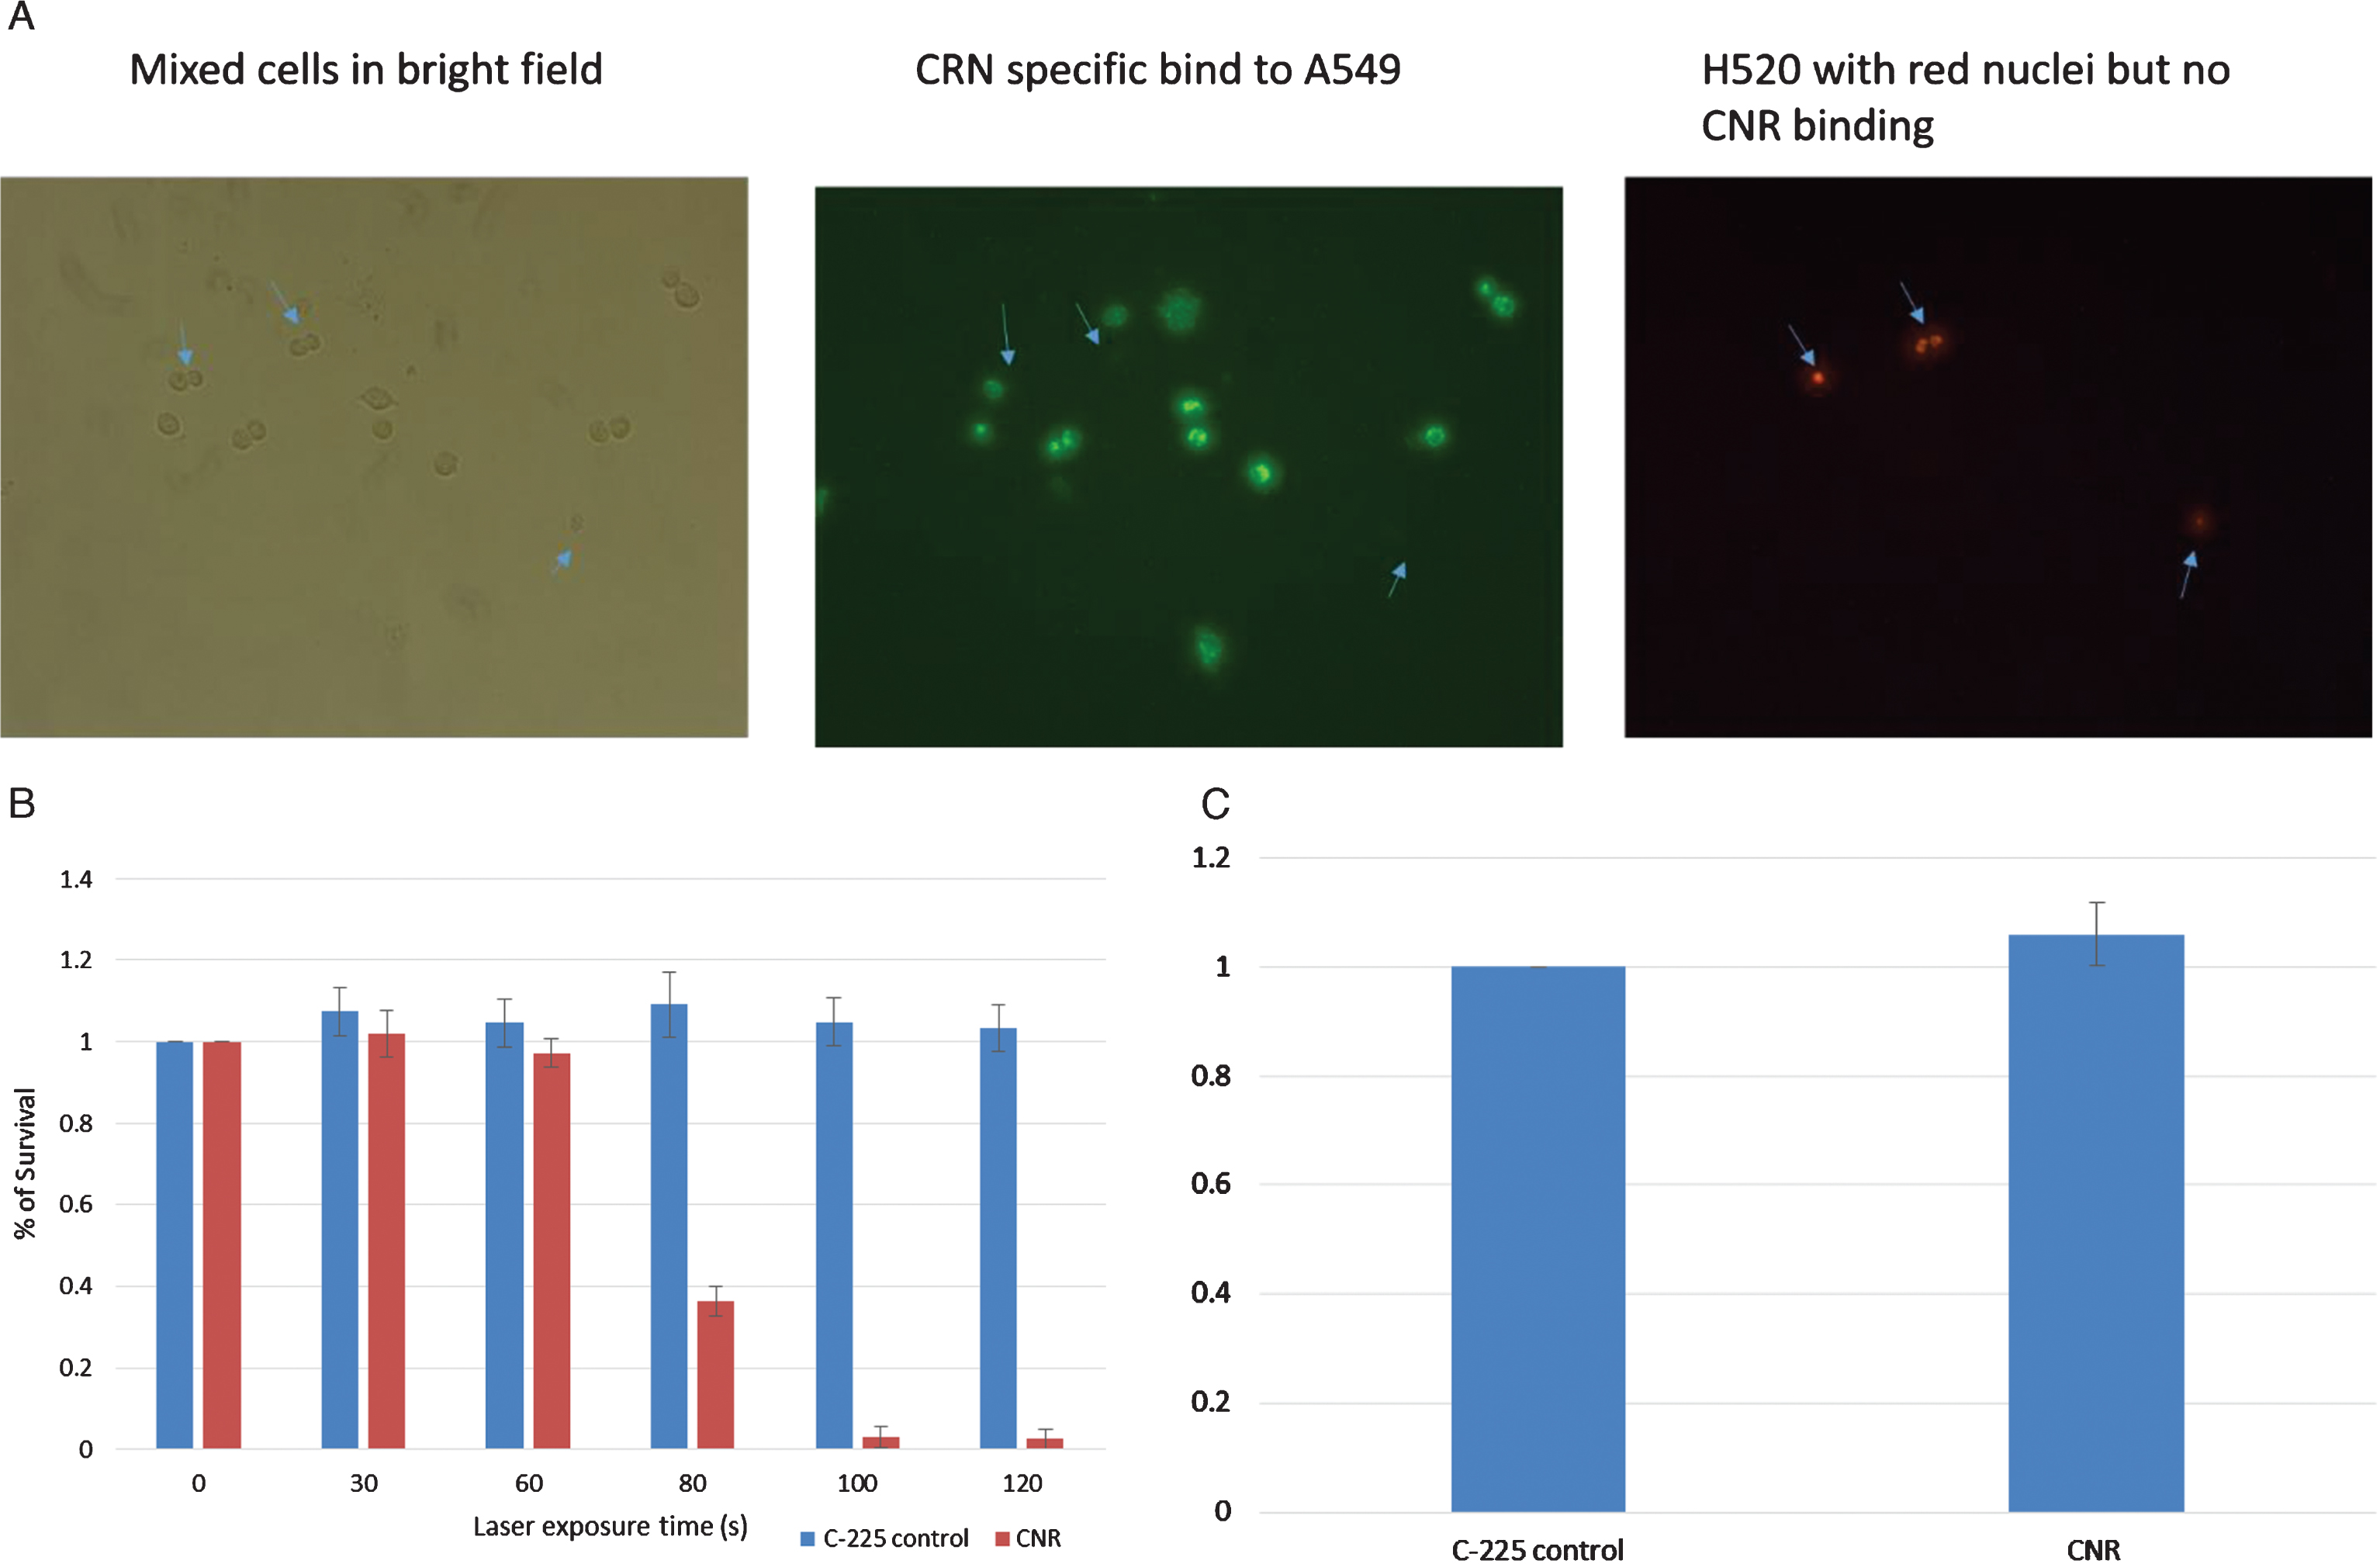 In vitro testing. EGFR-negative H520 (NucLight red) were mixed with EGFR-positive A549 cells (Fig. 1A). The left panel shows bright field images of all cells, the middle panel shows green fluorescence of the CNR binding the EGFR-positive A549 cells (Donkey anti human Dylight labelled secondary antibody) and the Right panel shows the Red fluorescing H520 cells (location indicated by the blue arrows in each panel). MB49 bladder cancer cells were treated with CNR and laser at increasing exposure duration with cell survival assessed by MTT assay. Standard deviation is shown (Fig. 1B). MB49 cells were incubated with the guiding C-225 antibody and the CNR construct to assess any inherit toxicity from the CNR in the absence of laser. An MTT assay was performed after 5 days (Fig. 1C).